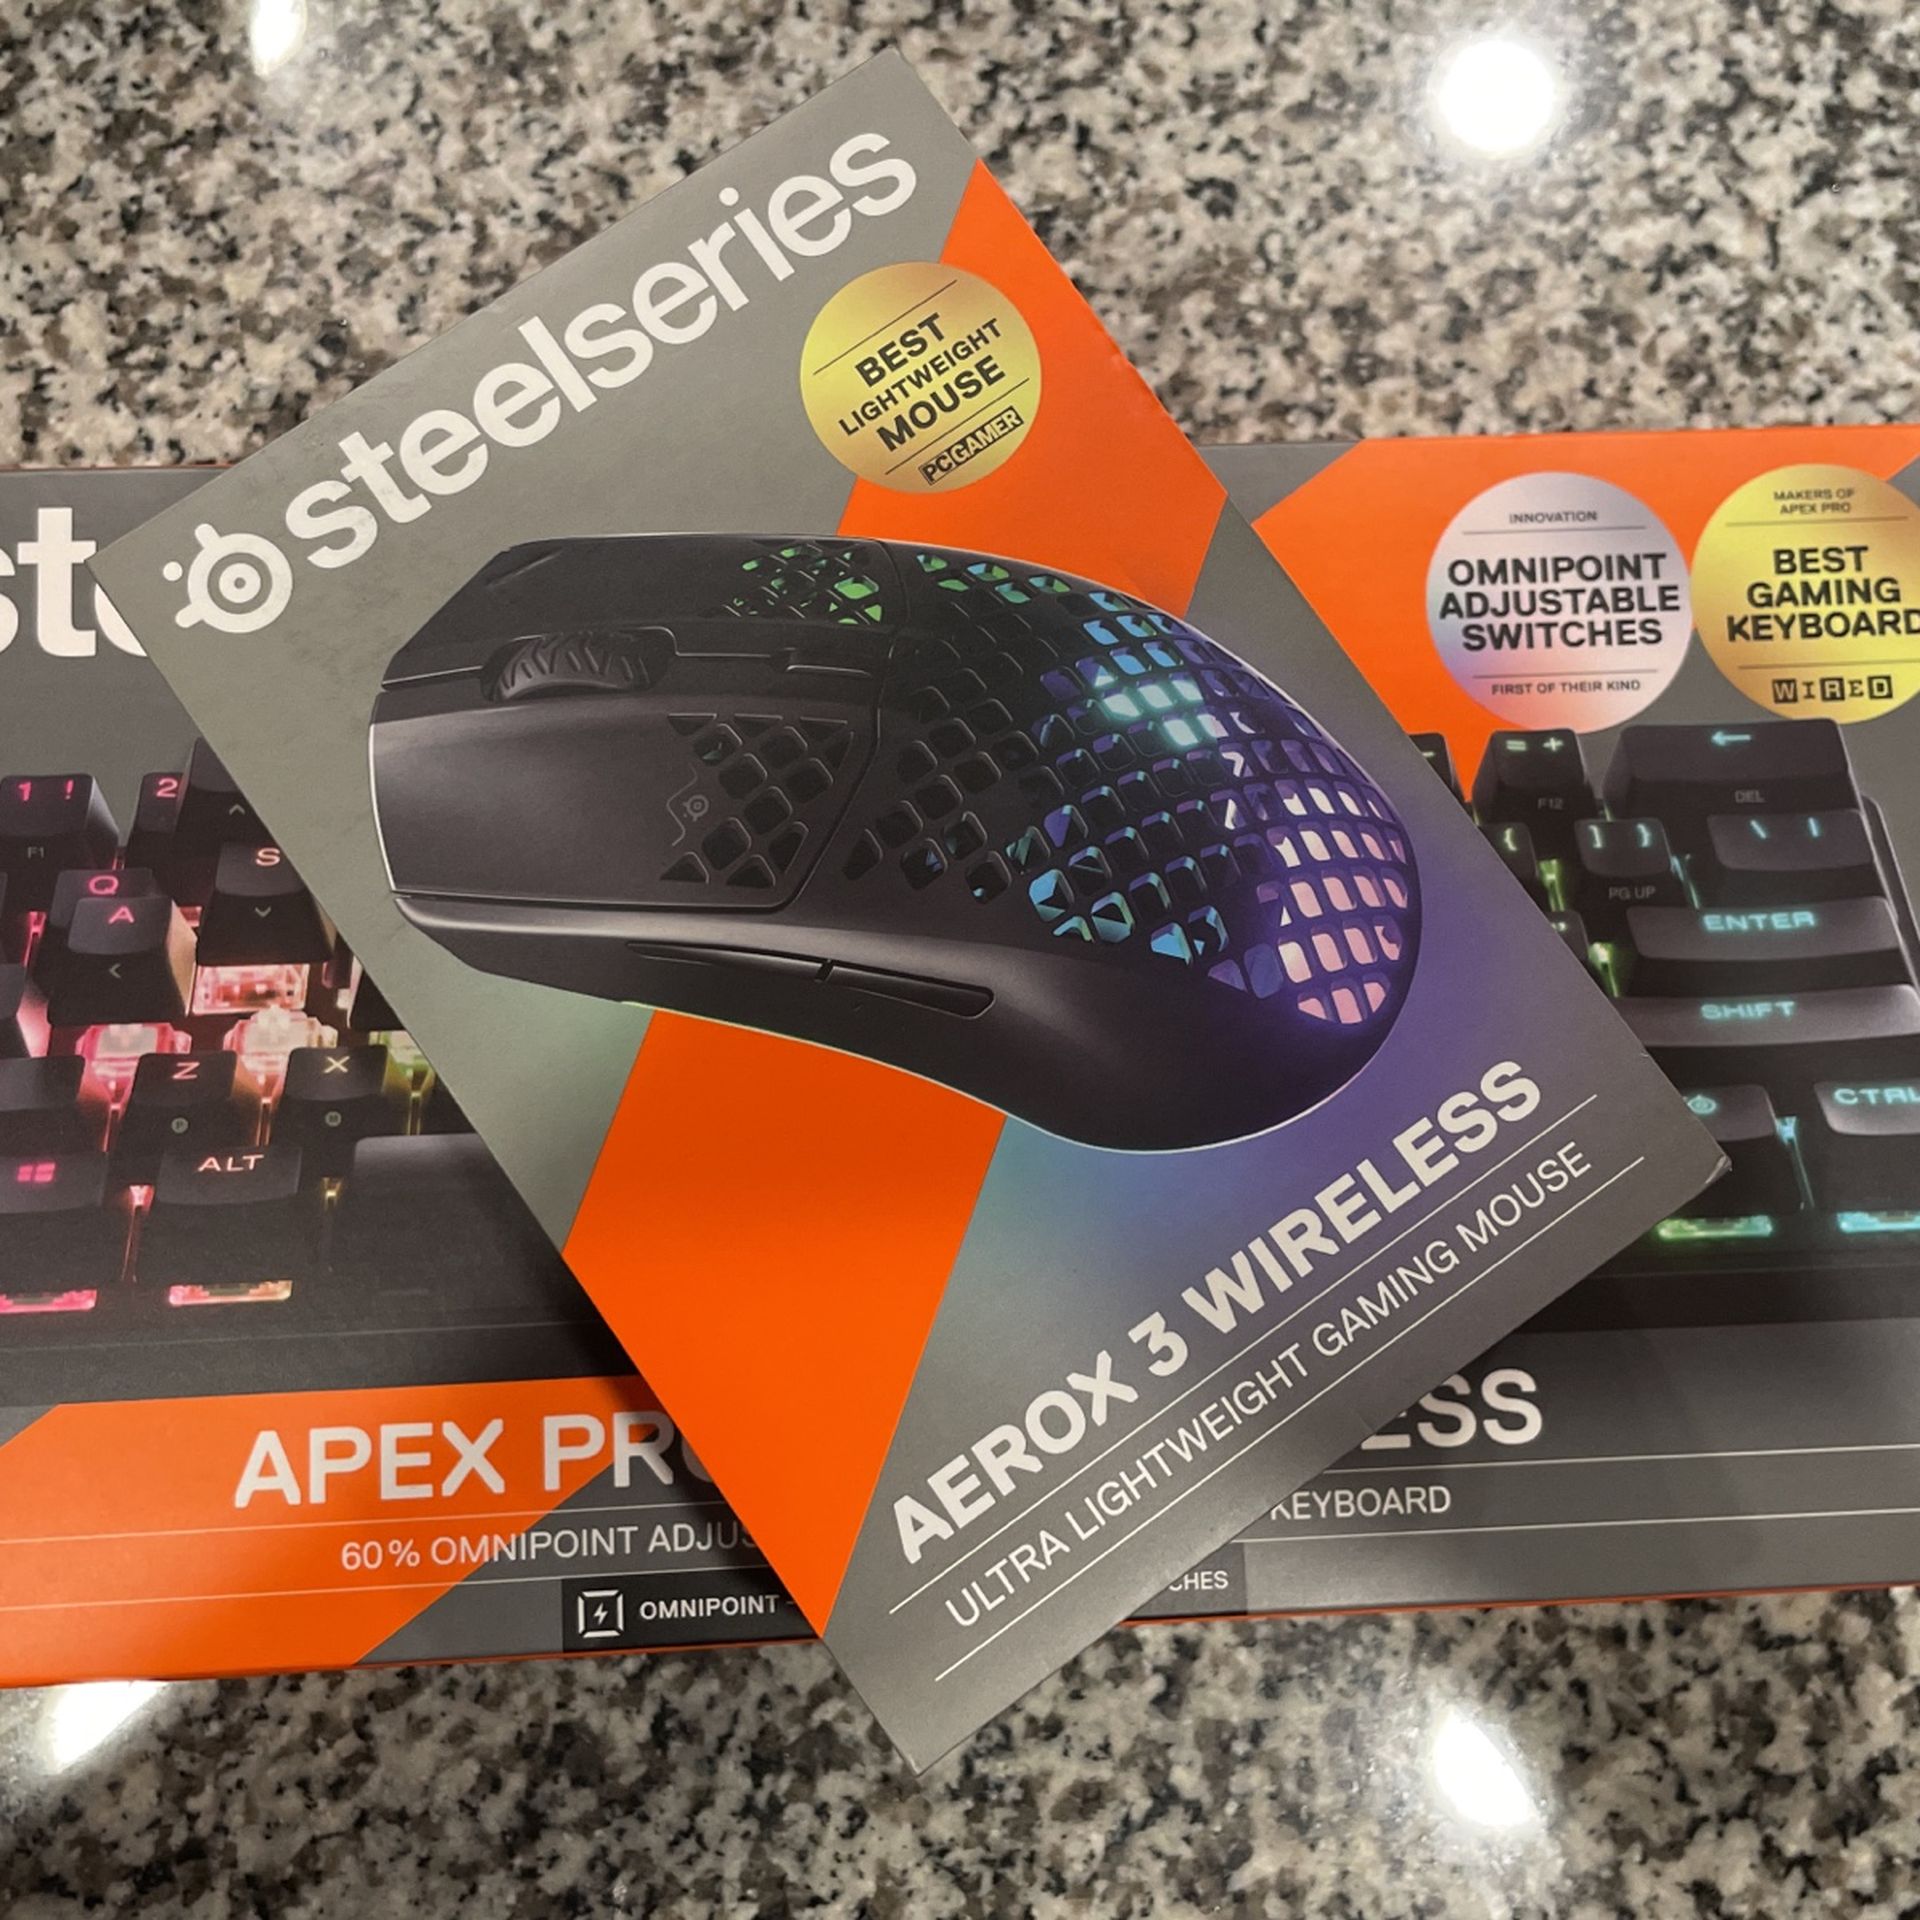 Steelseries Keyboard And Mouse